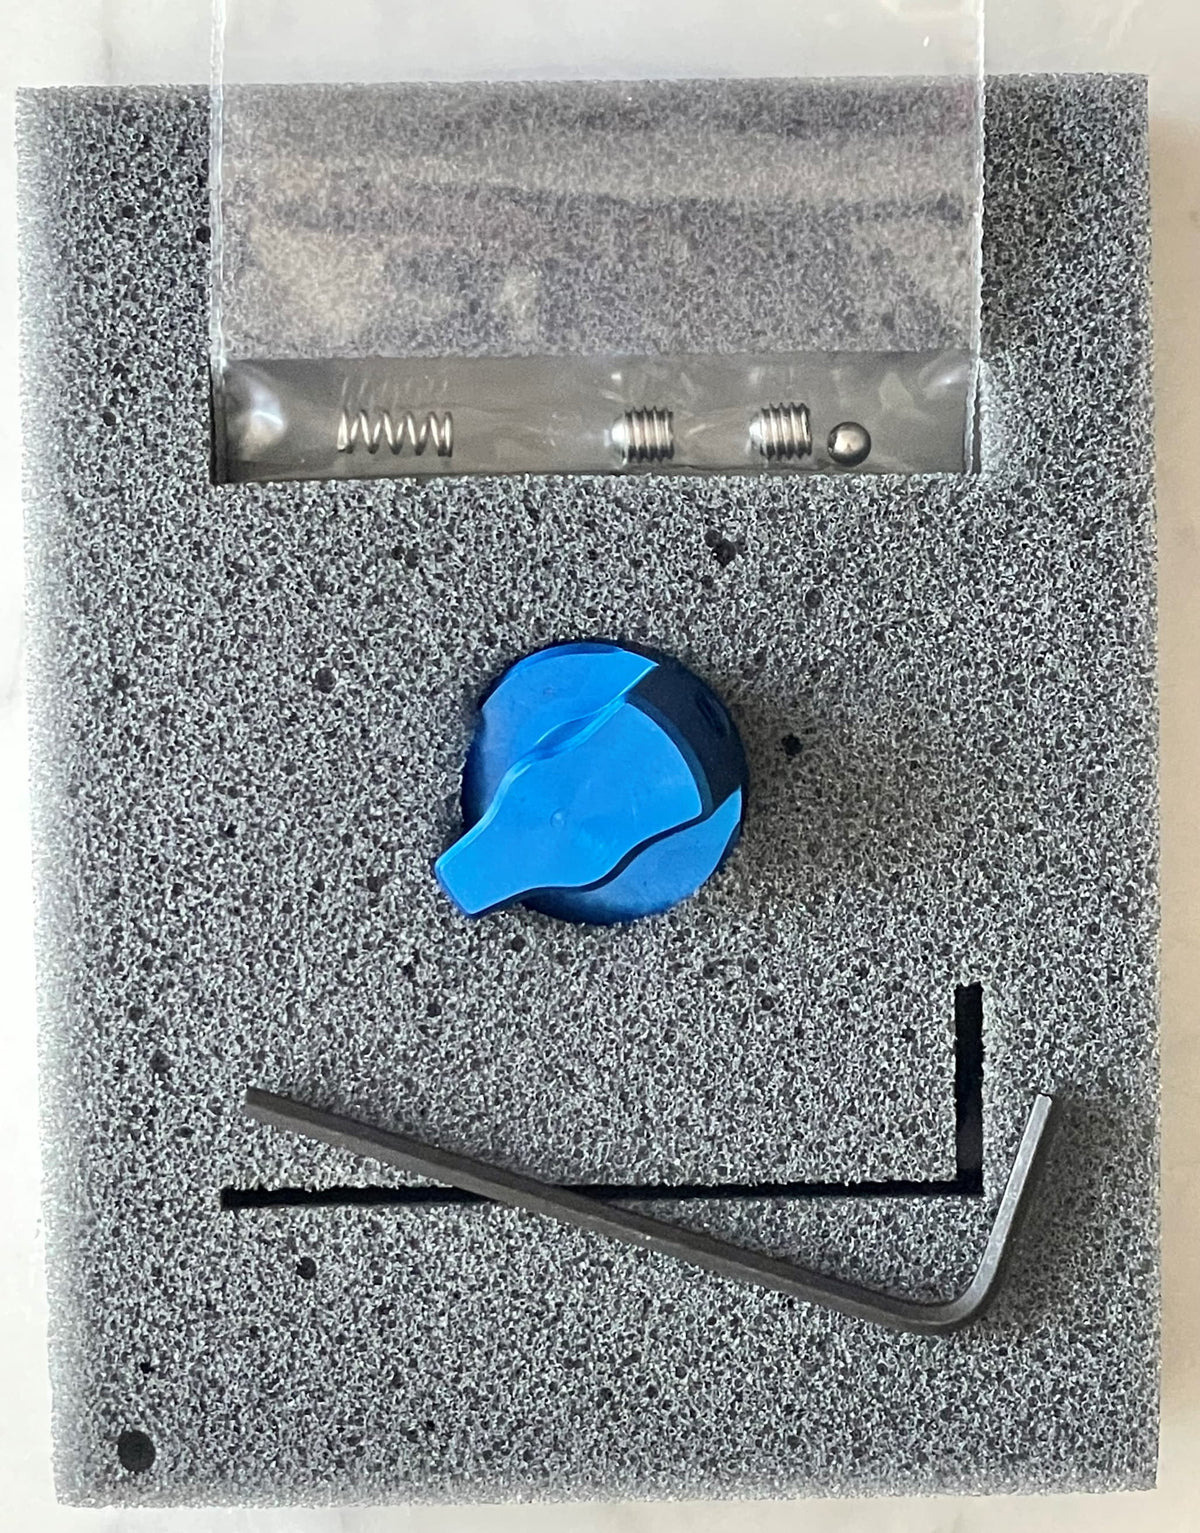 mscmotousa, Blue Adjuster Knob for RM3, Axis, and VectorMX Steering Dampers, MK0001, axis, rm3, vectormx, , Imported and distributed in North &amp; South America by Lindeco Genuine Powersports.